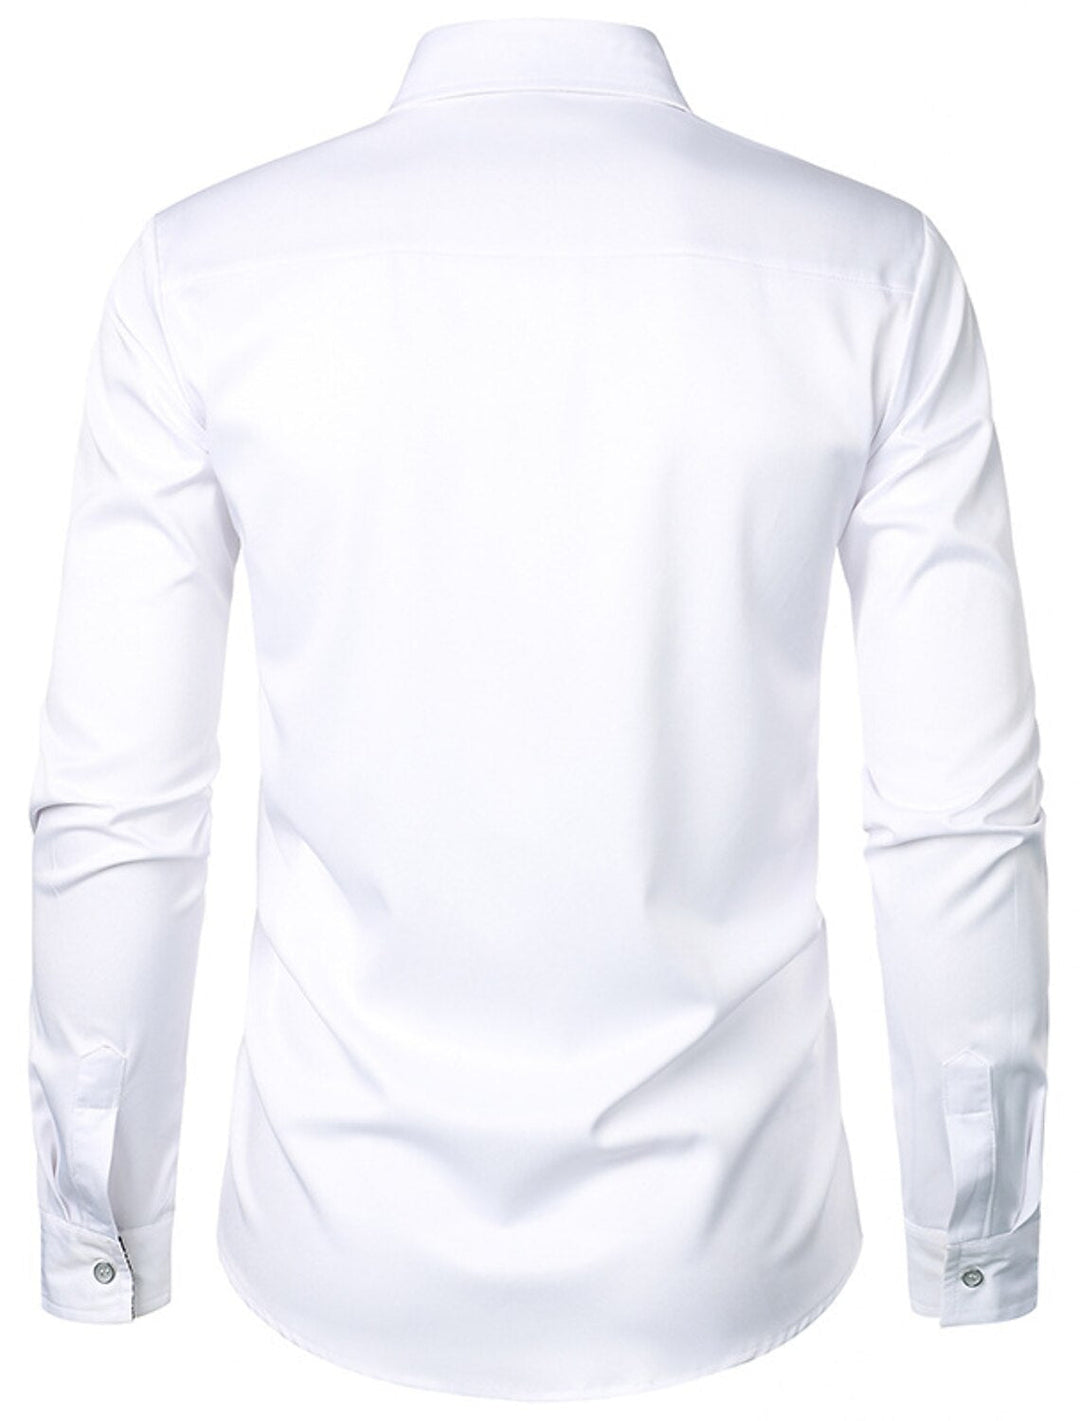 White Red Black Men's Long Sleeves Classic Solid Color Shirt